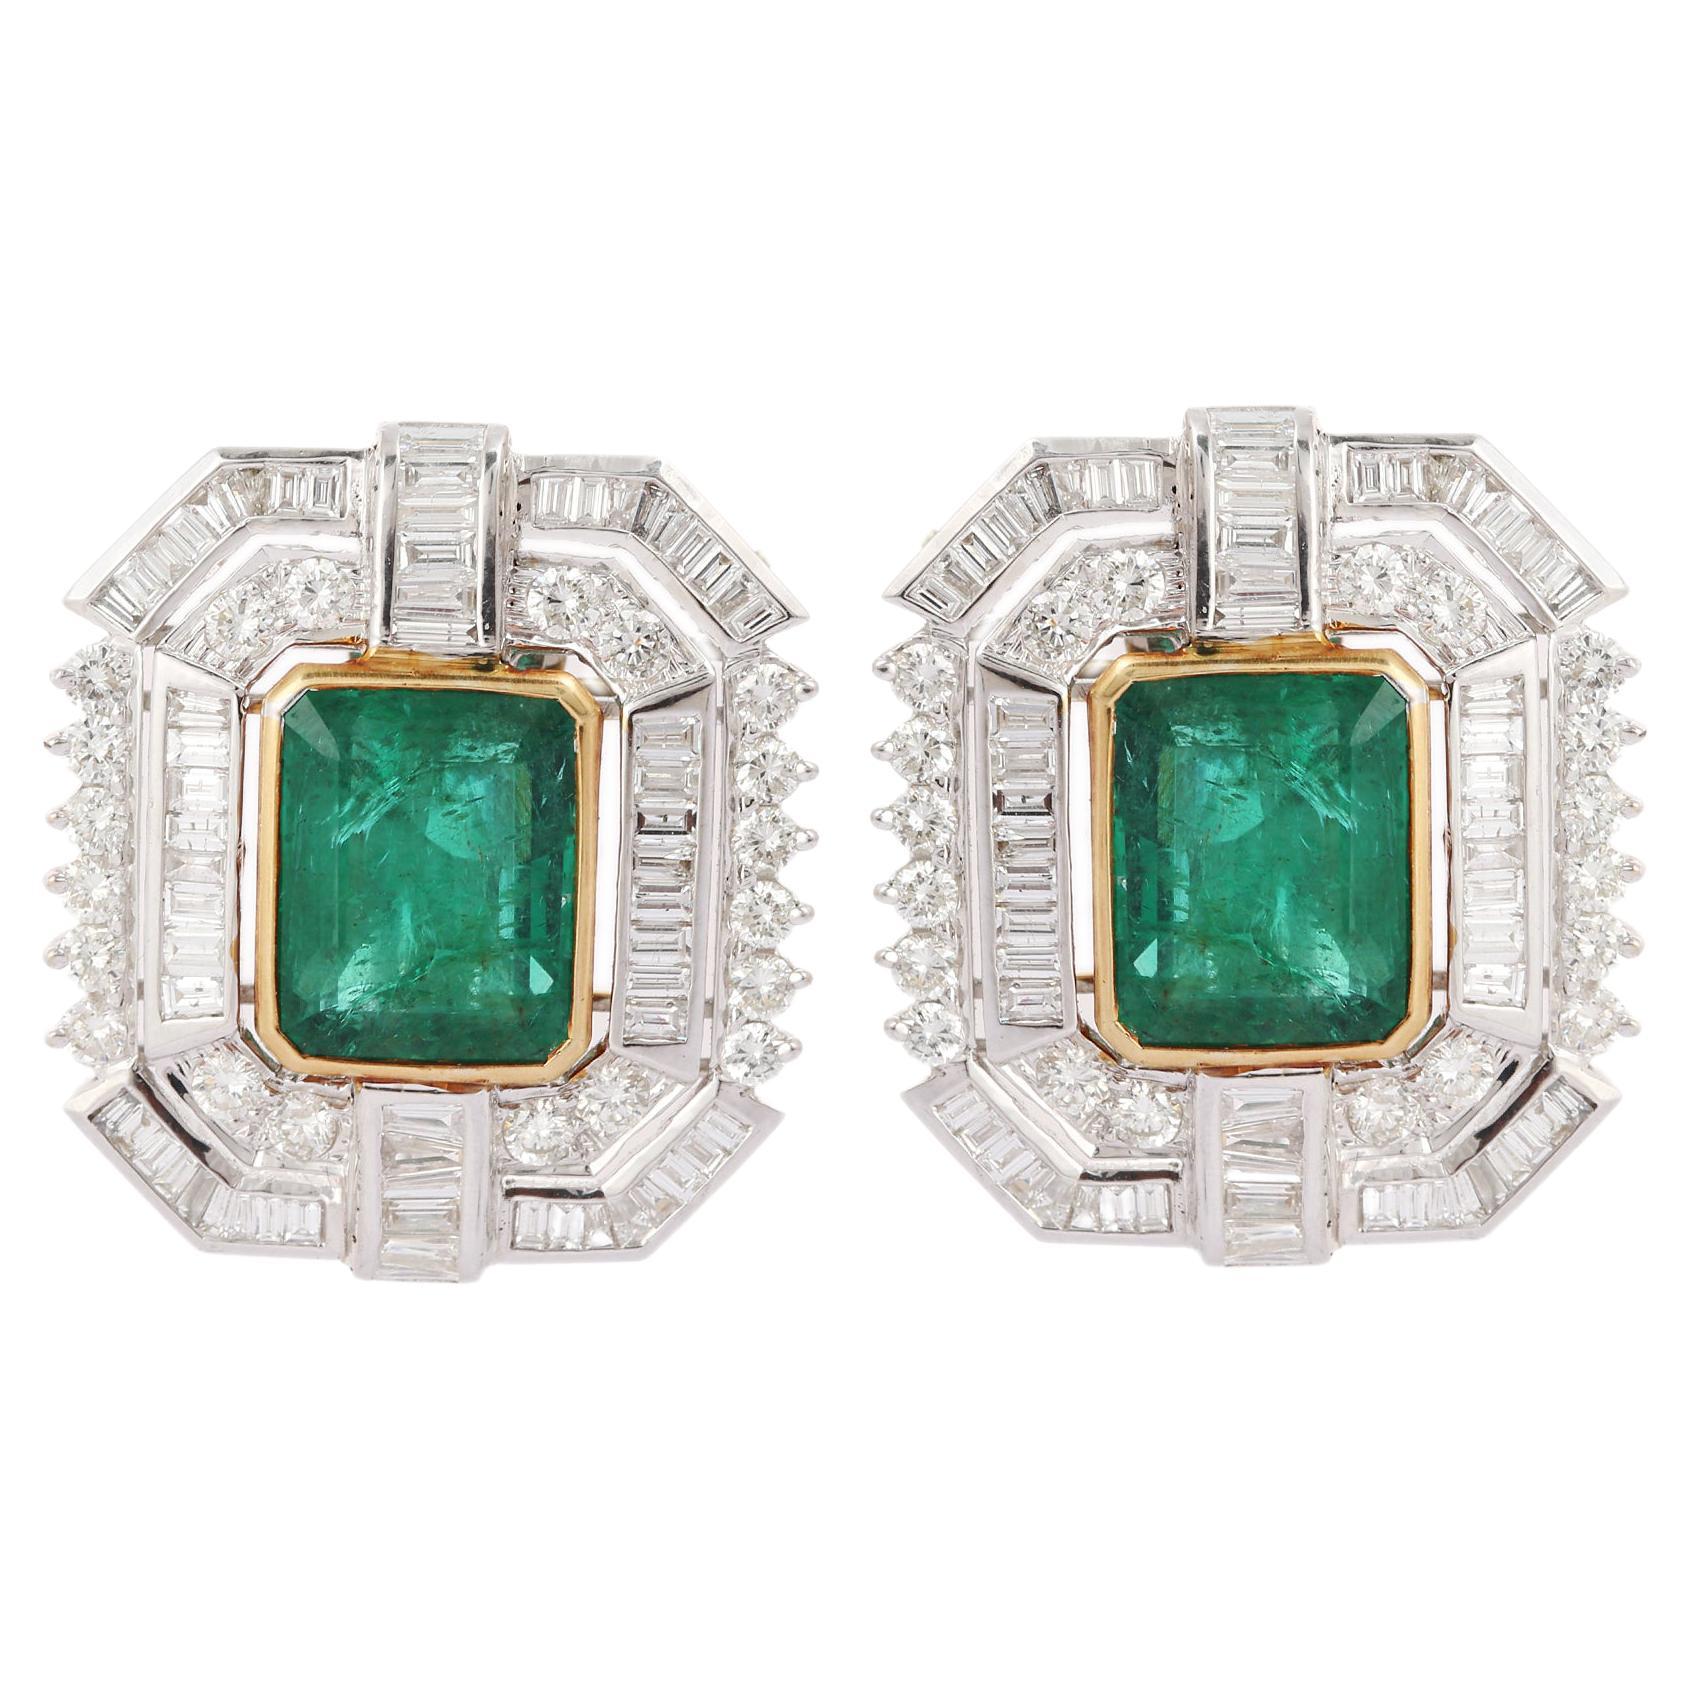 9.7 Carat Emerald Stud Earrings with Diamonds in 18K White Gold